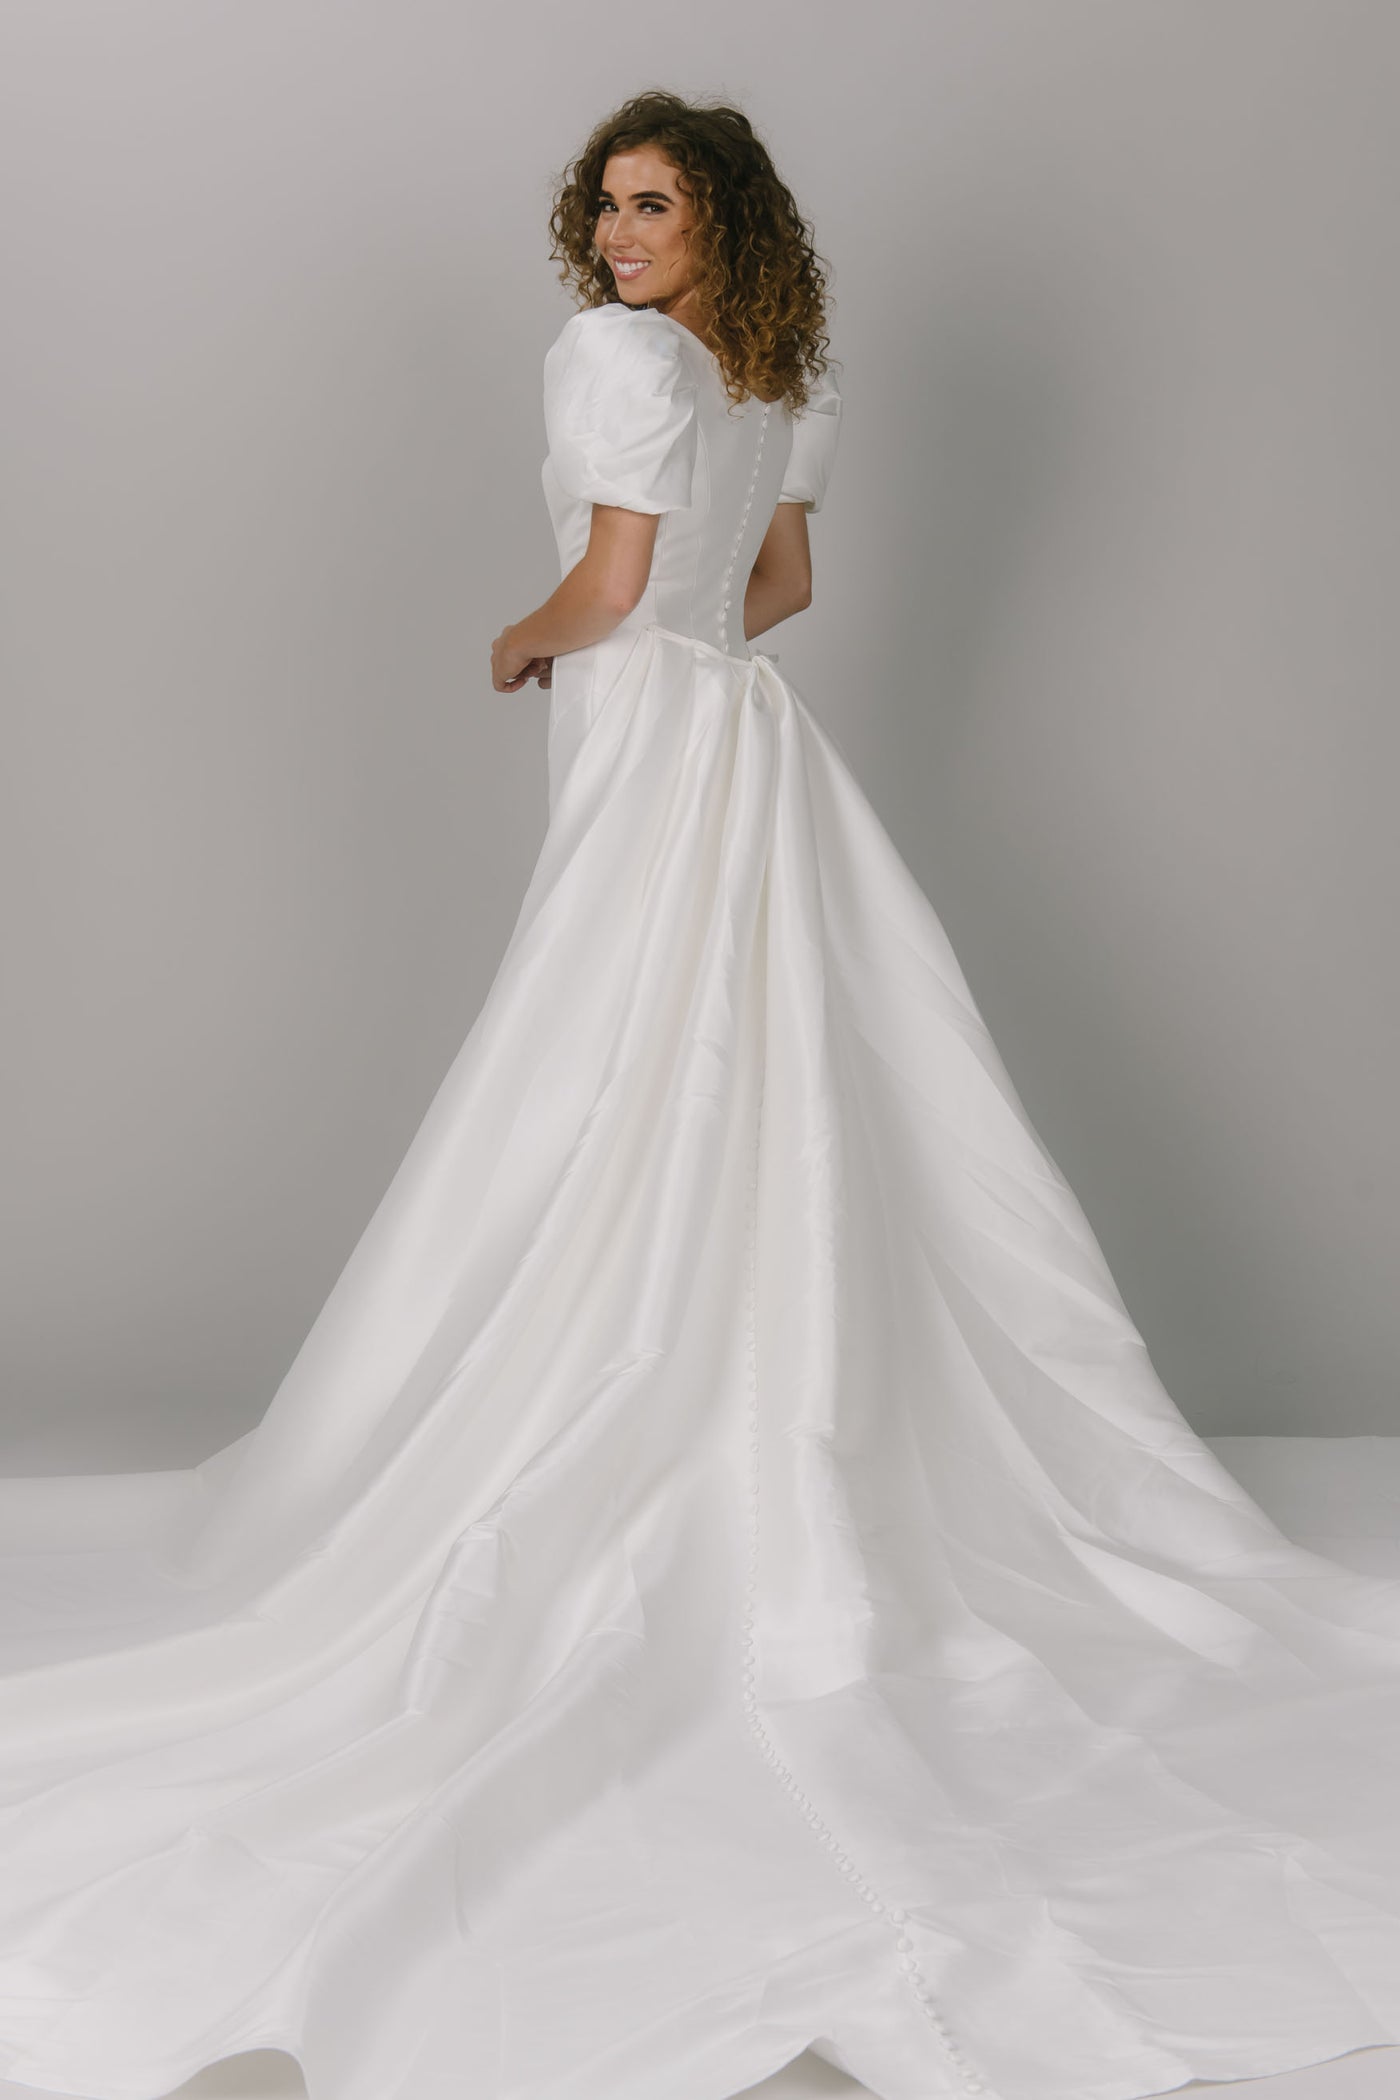 Back view with overskirt of modest wedding dress with contour lines. It is a fitted dress with puffed sleeves. This dress has a scoop neckline and is a gorgeous modest wedding gown.